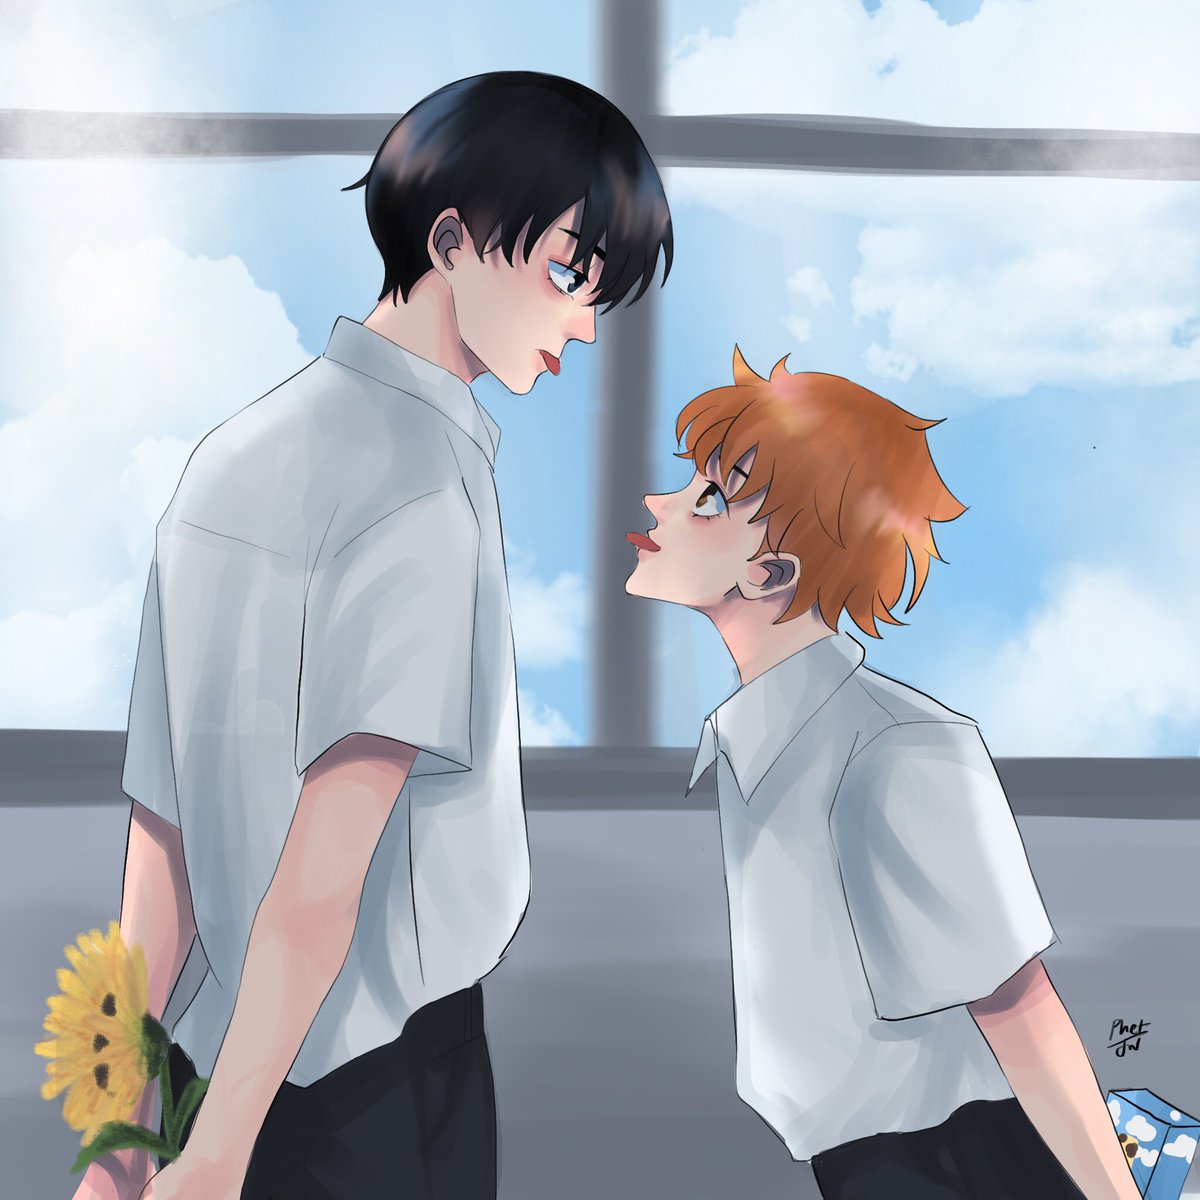 「  #kagehina  」|MarB ˚☁️૮(ˊ ᵔ ˋ)ა cms open!のイラスト